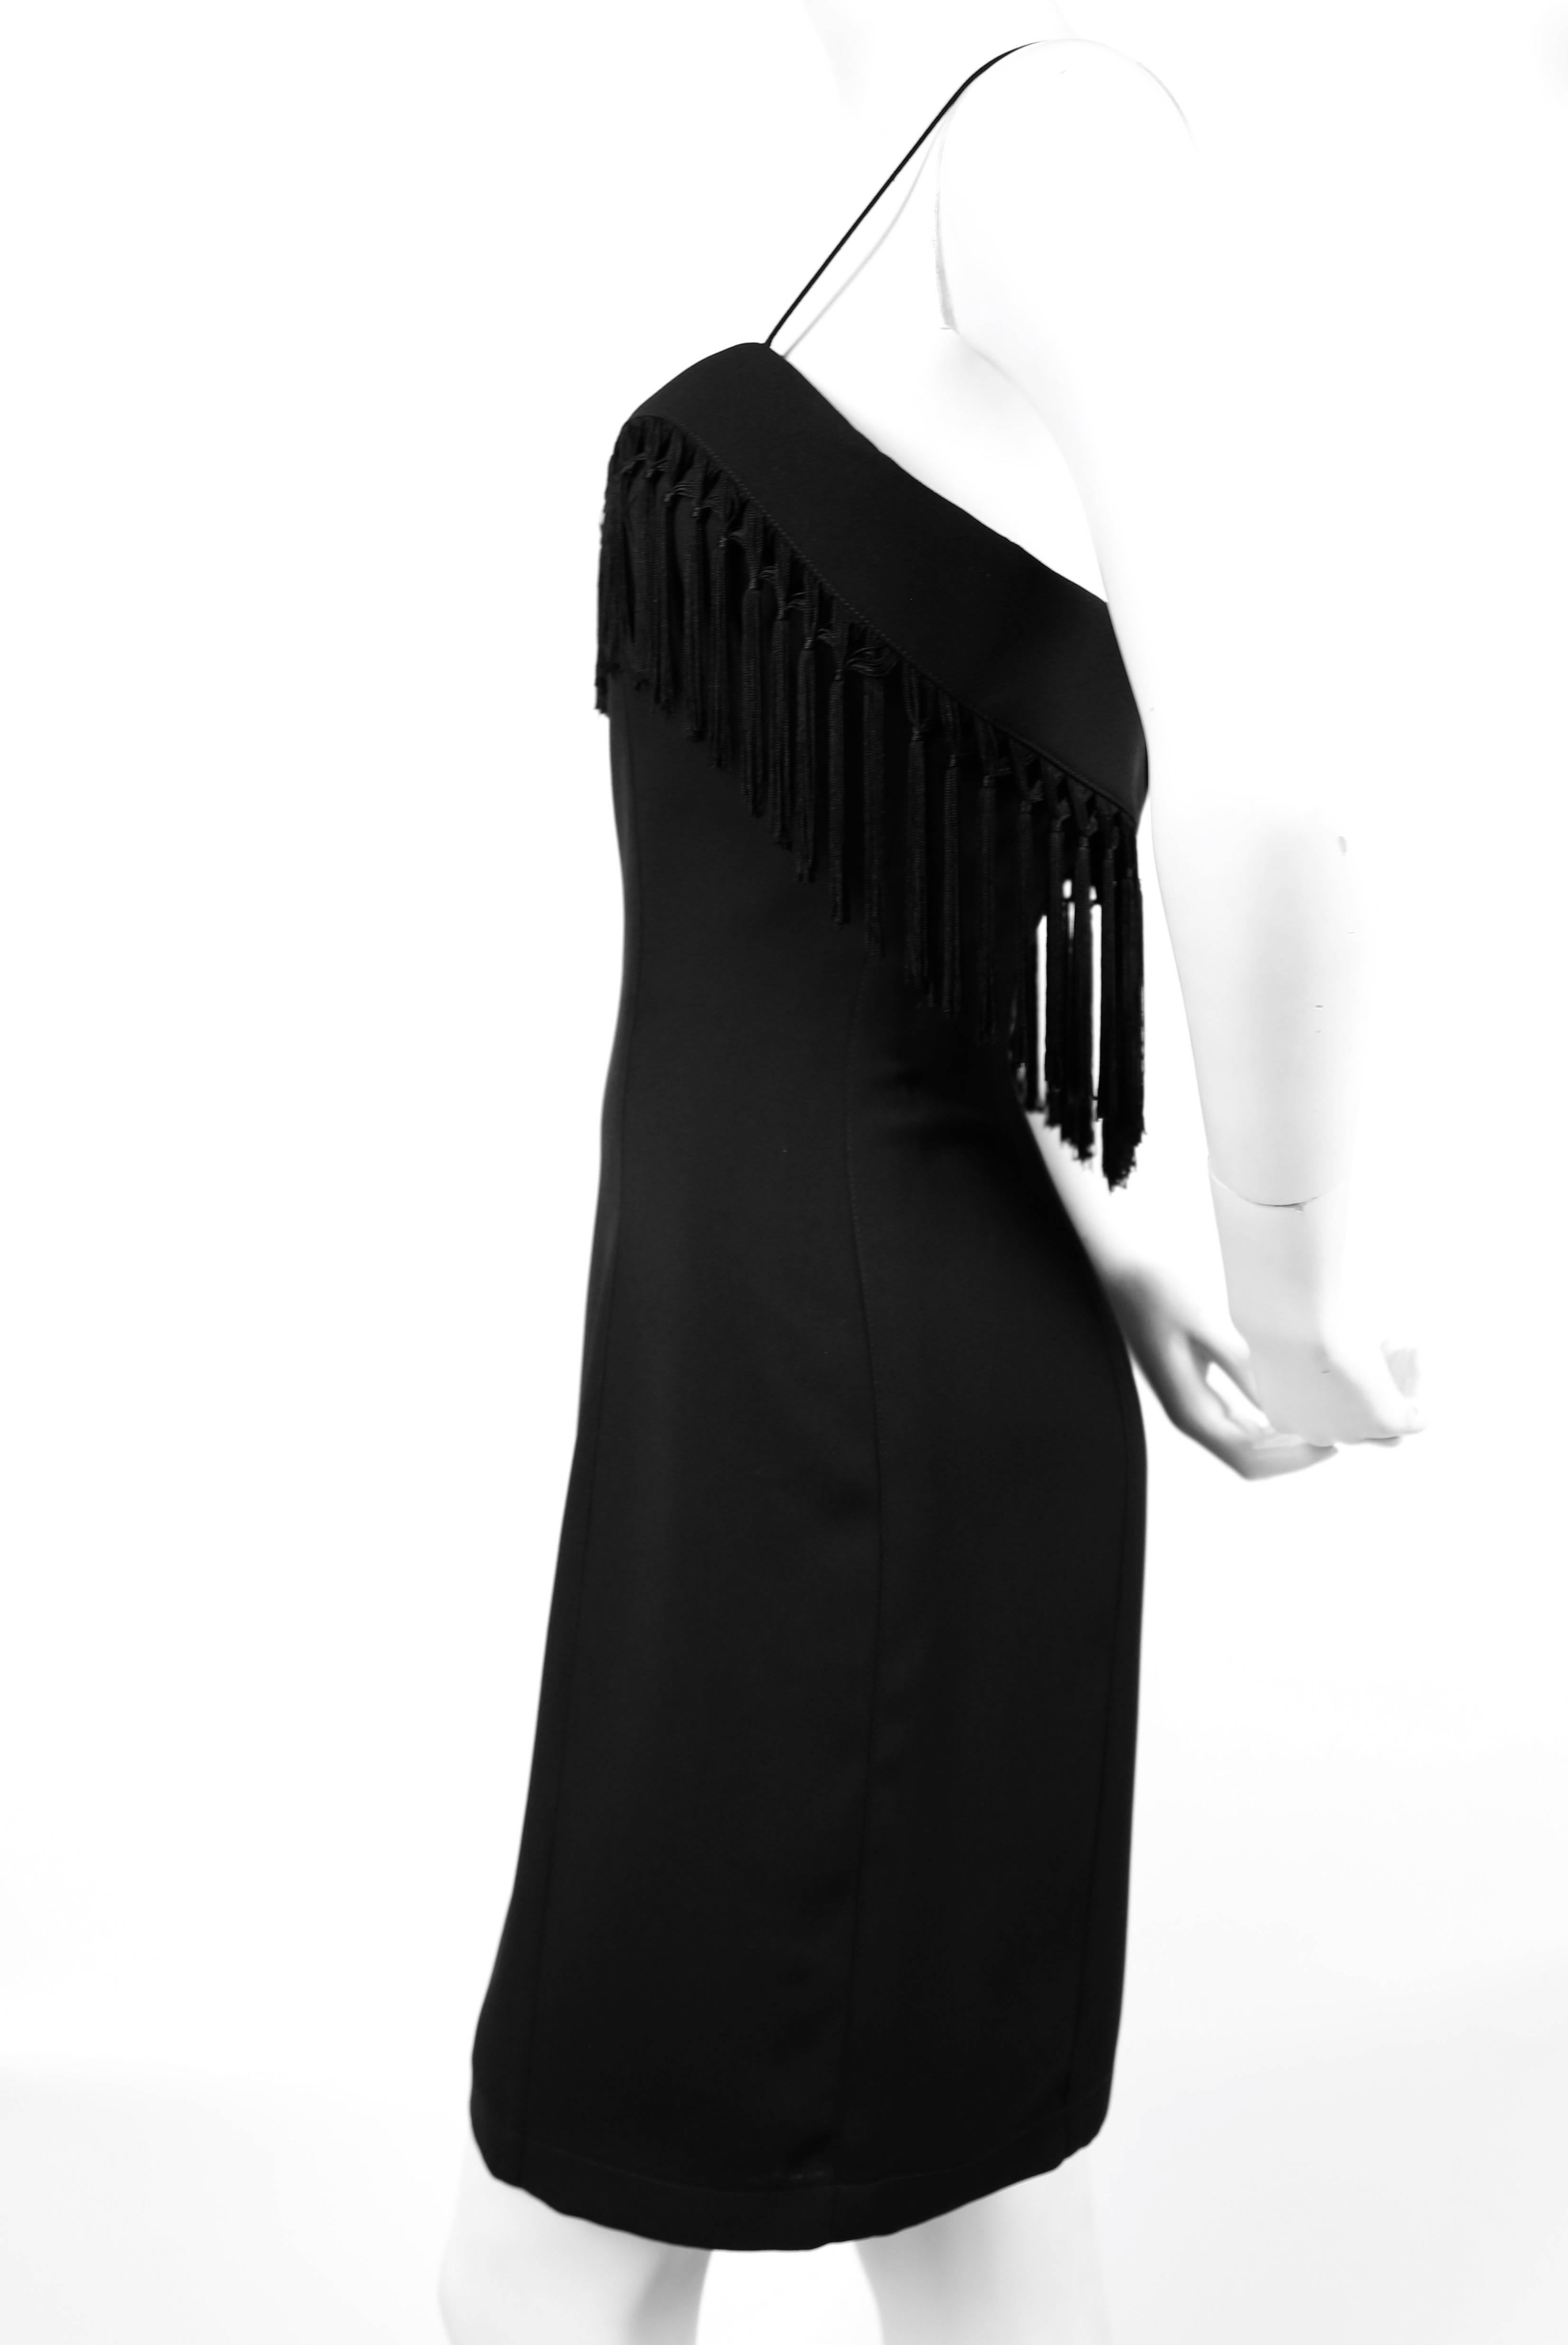 Jet black fitted dress with dramatic fringed trim from Thierry Mugler dating to the early 1990's. Labeled a French size 38. Bust 32.5-33, waist 27', hips 36" and length 35". Hidden back zipper. Made in France. Excellent condition.
